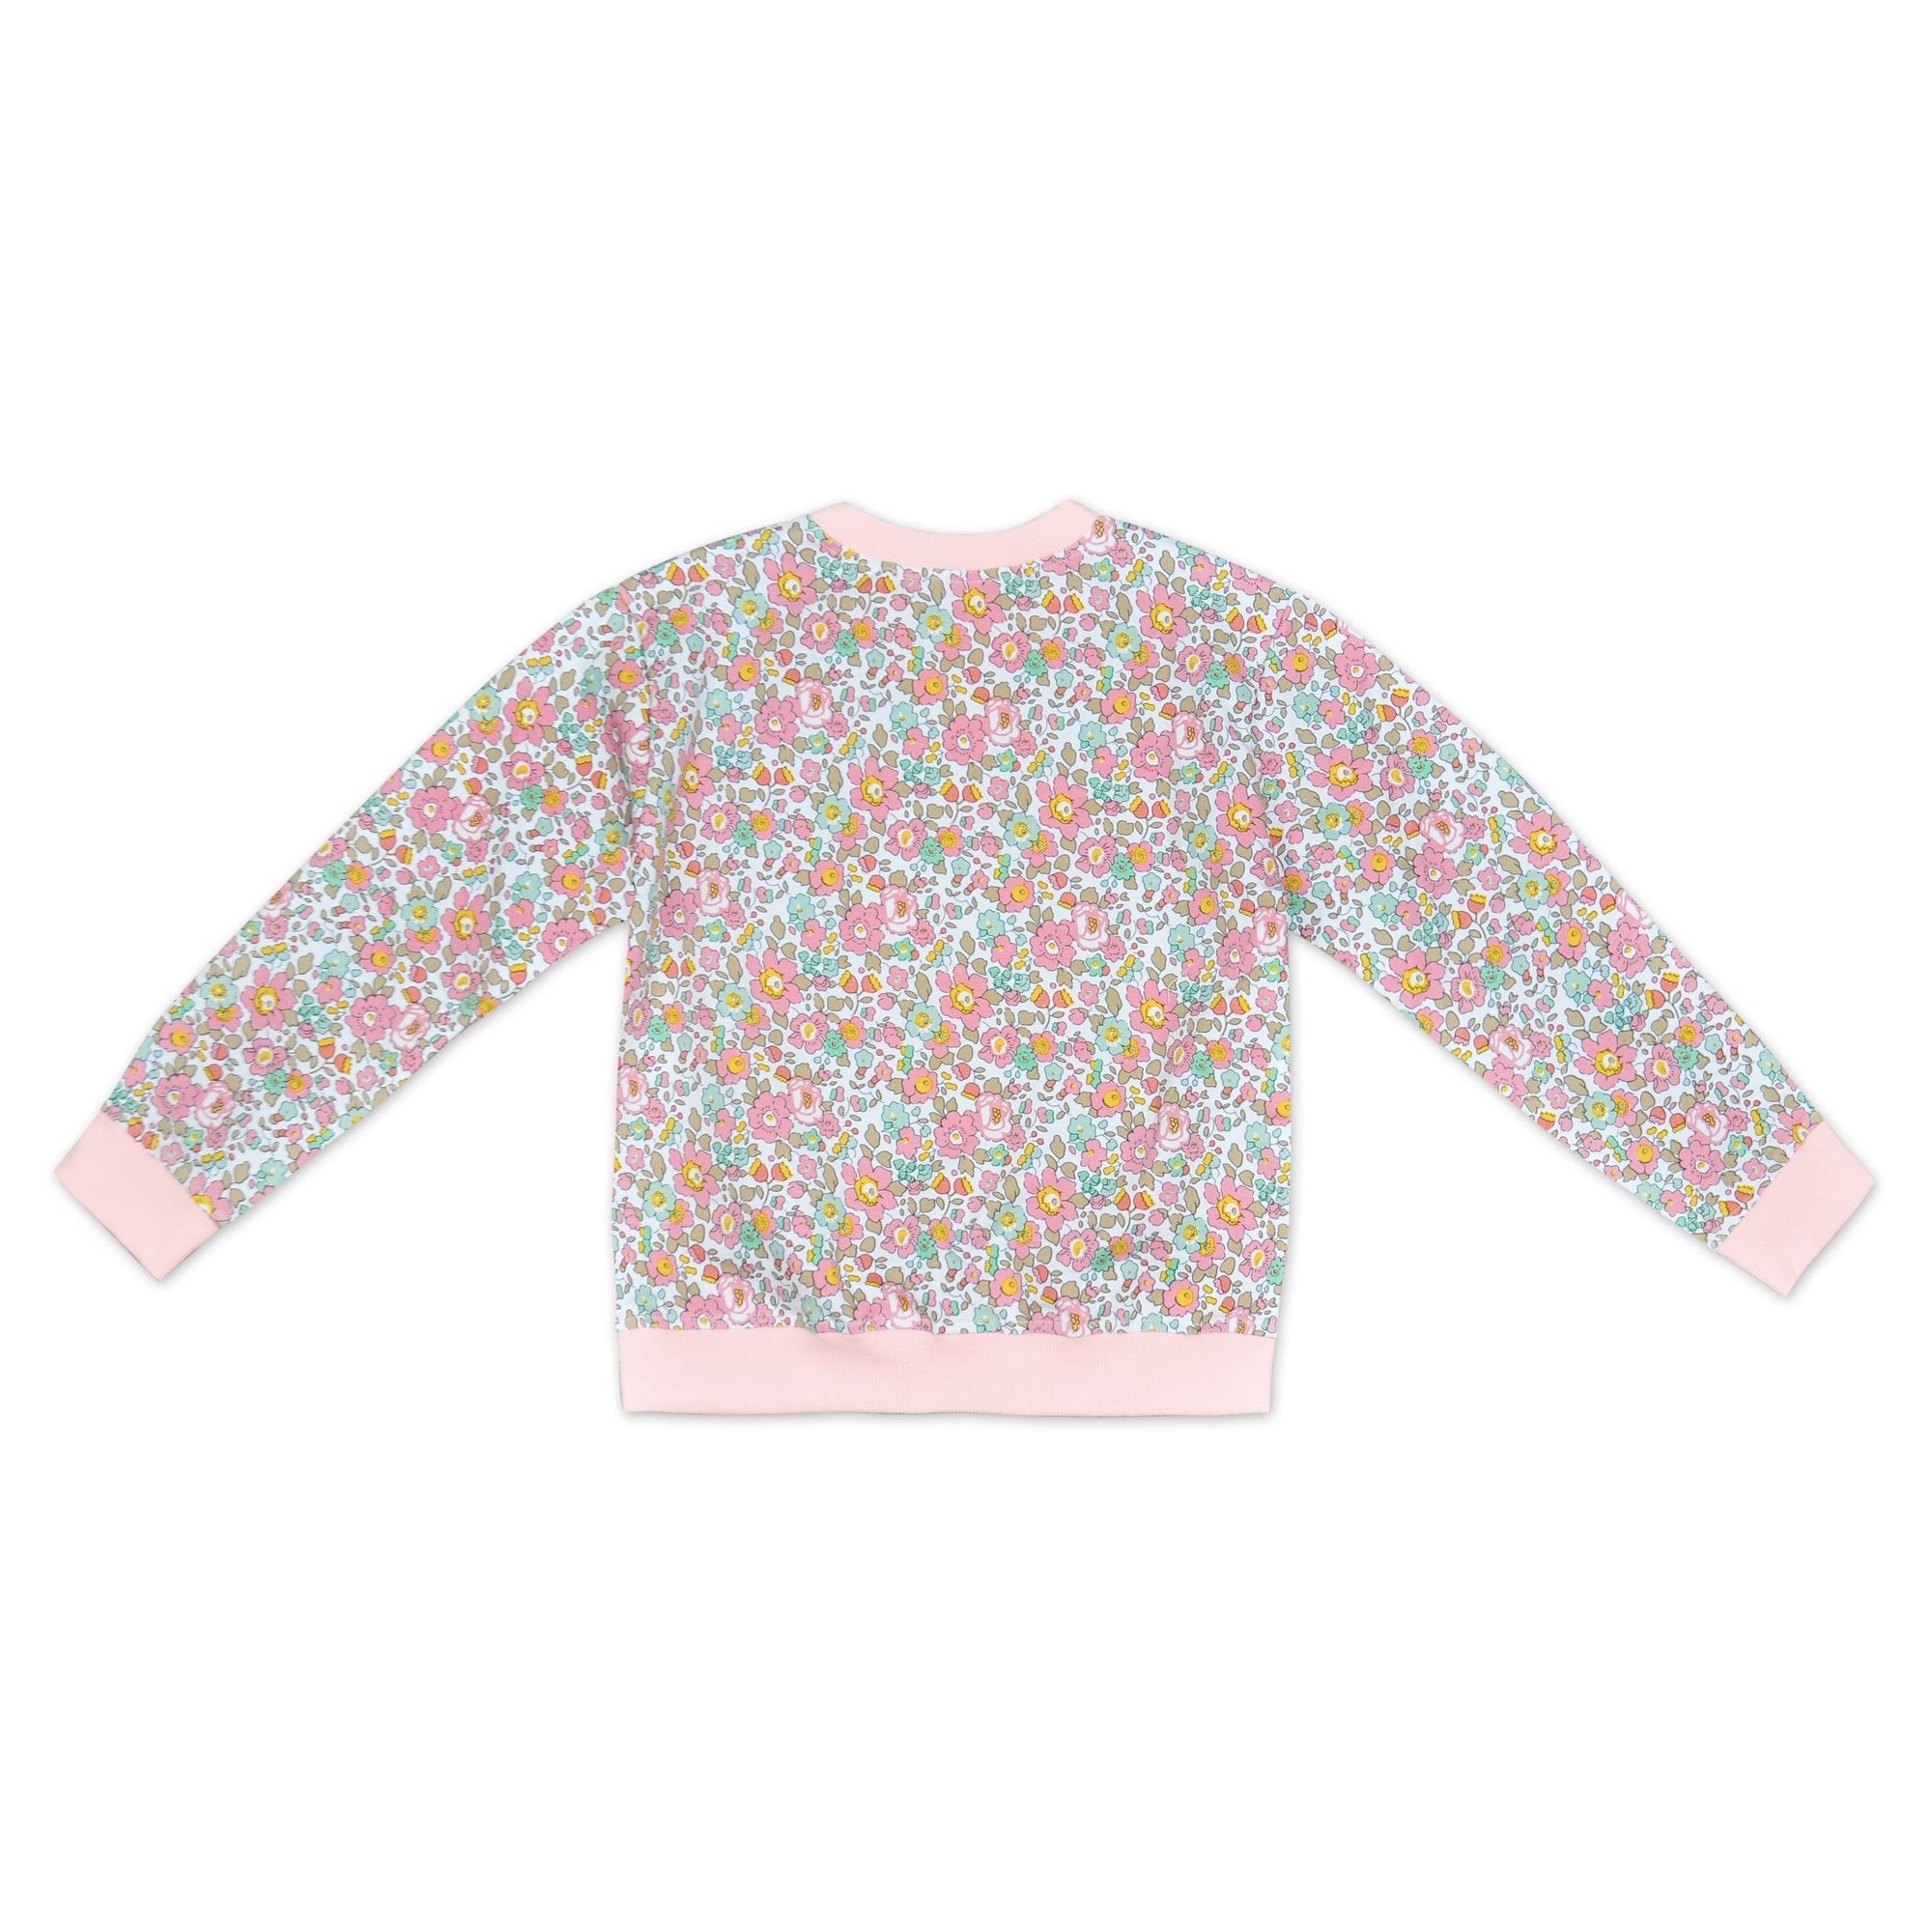 Bessie Pink Liberty Print Sweater - Cou Cou Baby